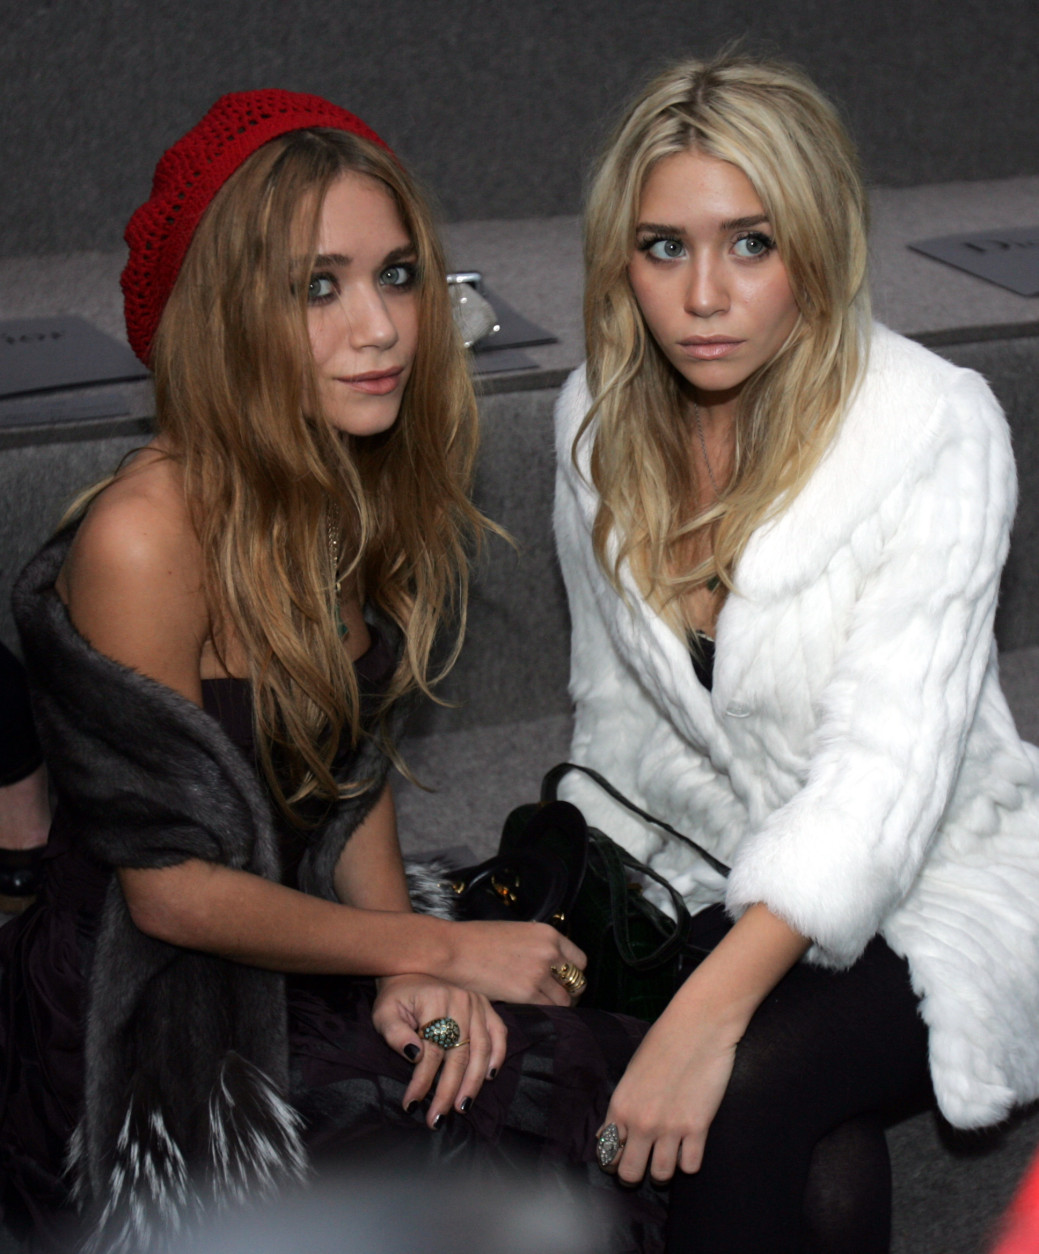 ** FILE ** Twin actresses Mary-Kate, left, and Ashley Olsen pose for the press prior to the  presentation of the Spring-Summer 2007 ready to wear collection by British designer John Galliano for French fashion house Dior in Paris, in this Oct. 3, 2006 file photo. The Olsen twins are hoping to spread a little "Influence."  Mark Kate-Olsen and Ashley Olsen are working on a coffee table book about fashion, called "Influence," that a division of Penguin Group (USA) will release in the fall. (AP Photo/Remy de la Mauviniere, File)